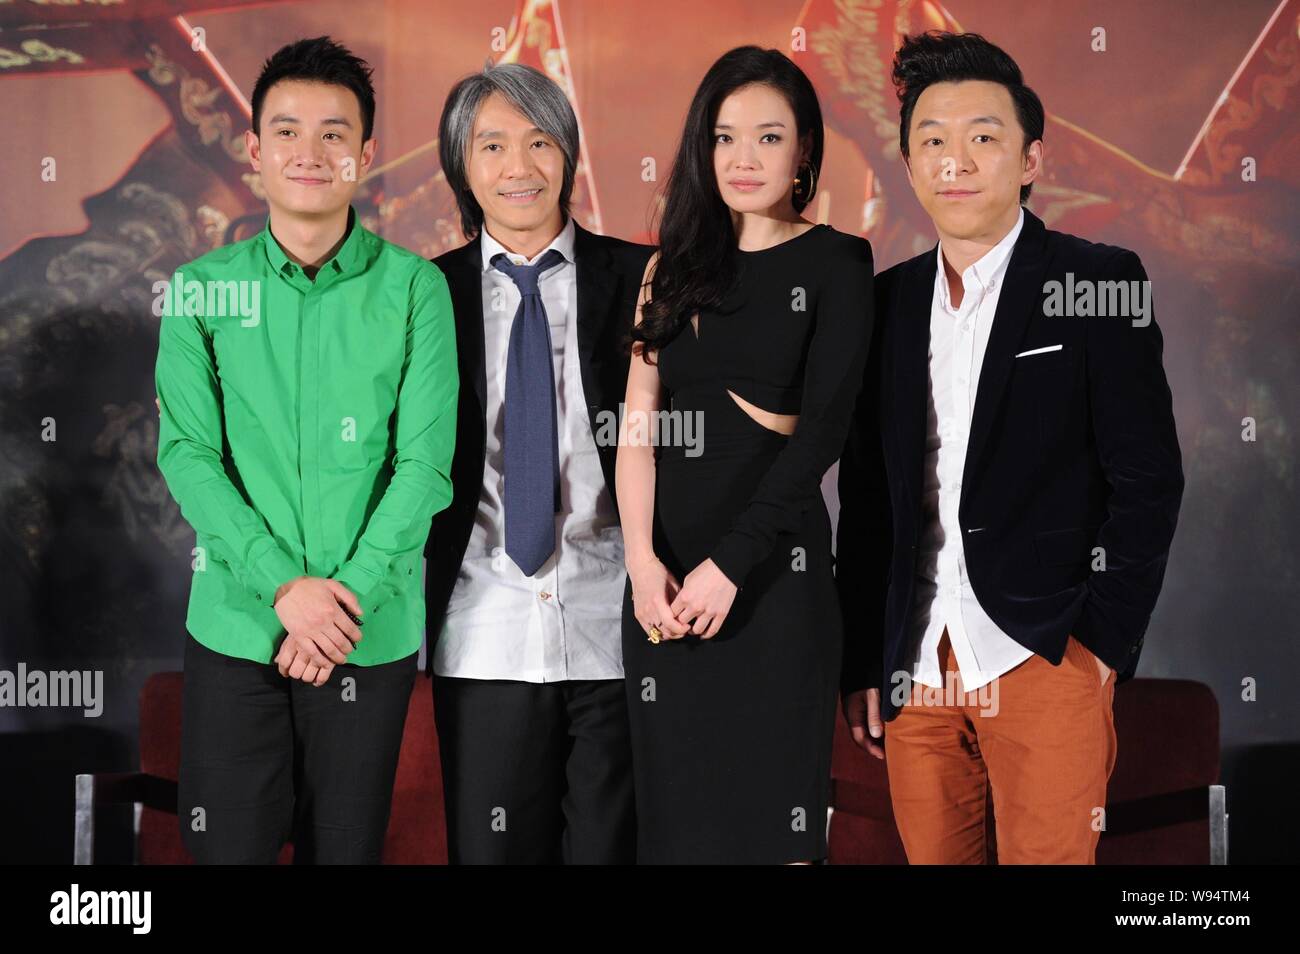 Cast members, from left, Chinese actor Wen Zhang, Hong Kong director Stephen Chow, Tianwanese actress Shu Qi and Chinese actor Huang Bo pose for a gro Stock Photo